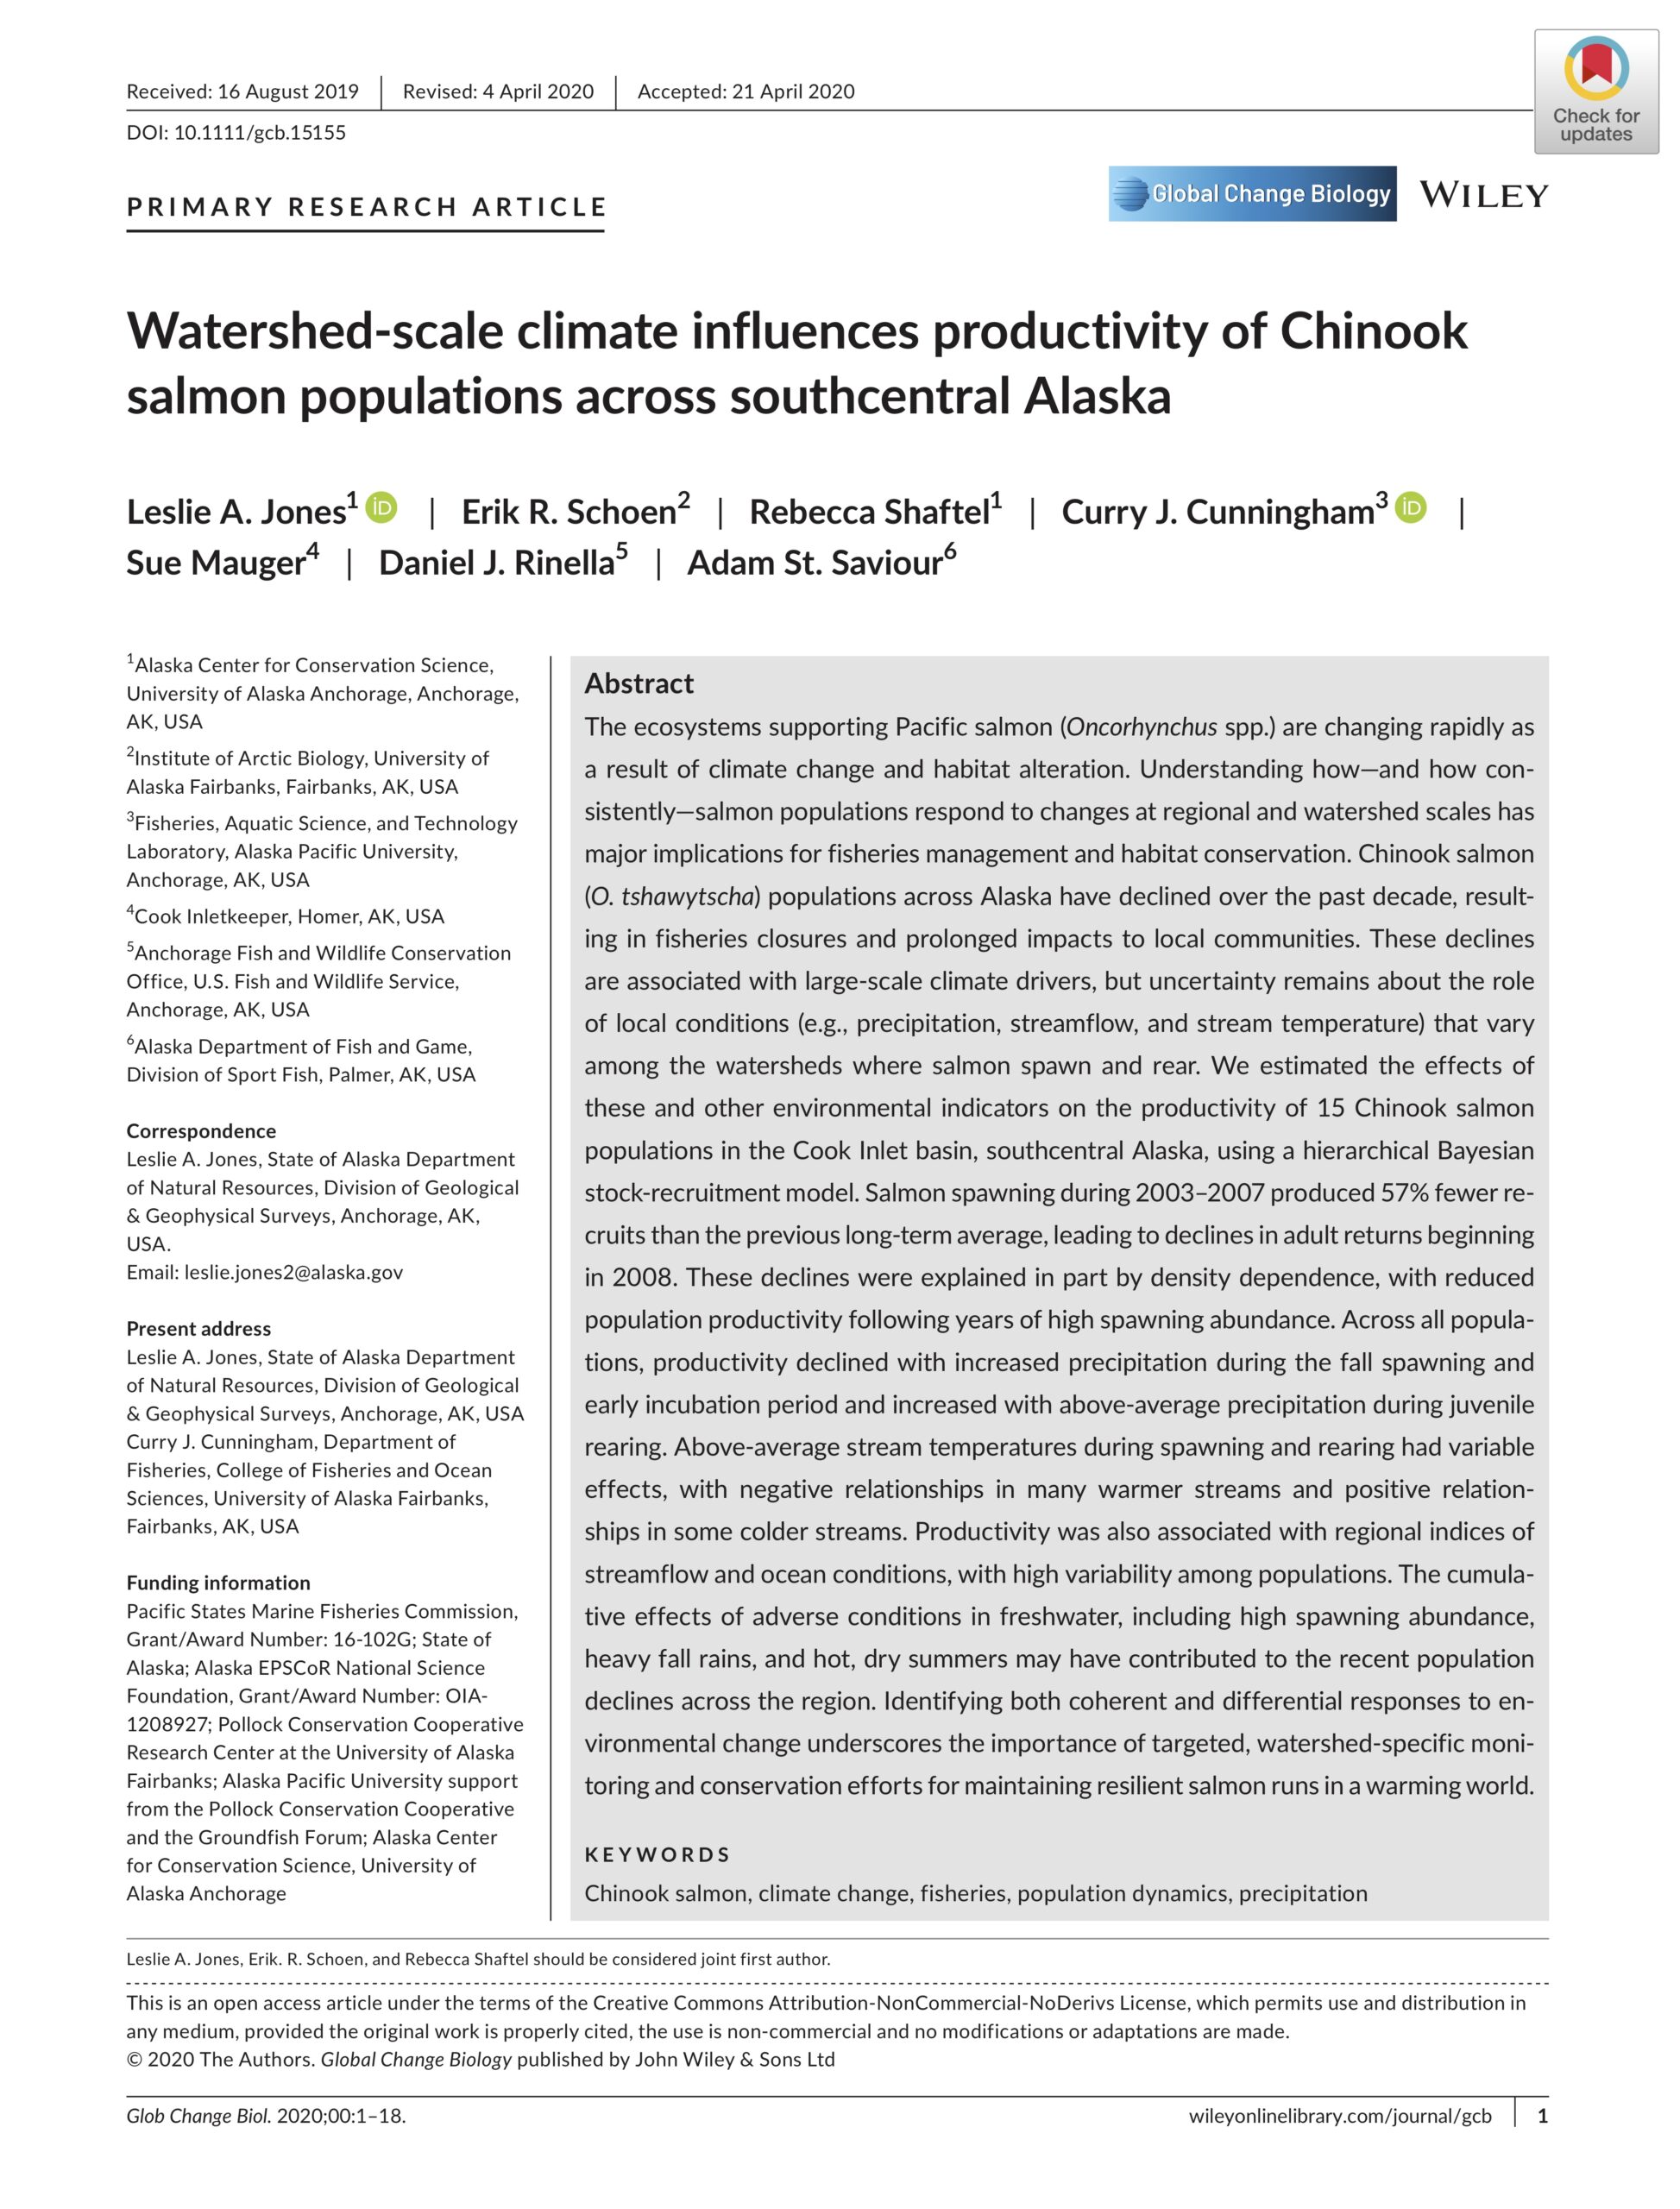 Jones et al. 2020: Watershed‐scale climate influences productivity of Chinook salmon populations across southcentral Alaska